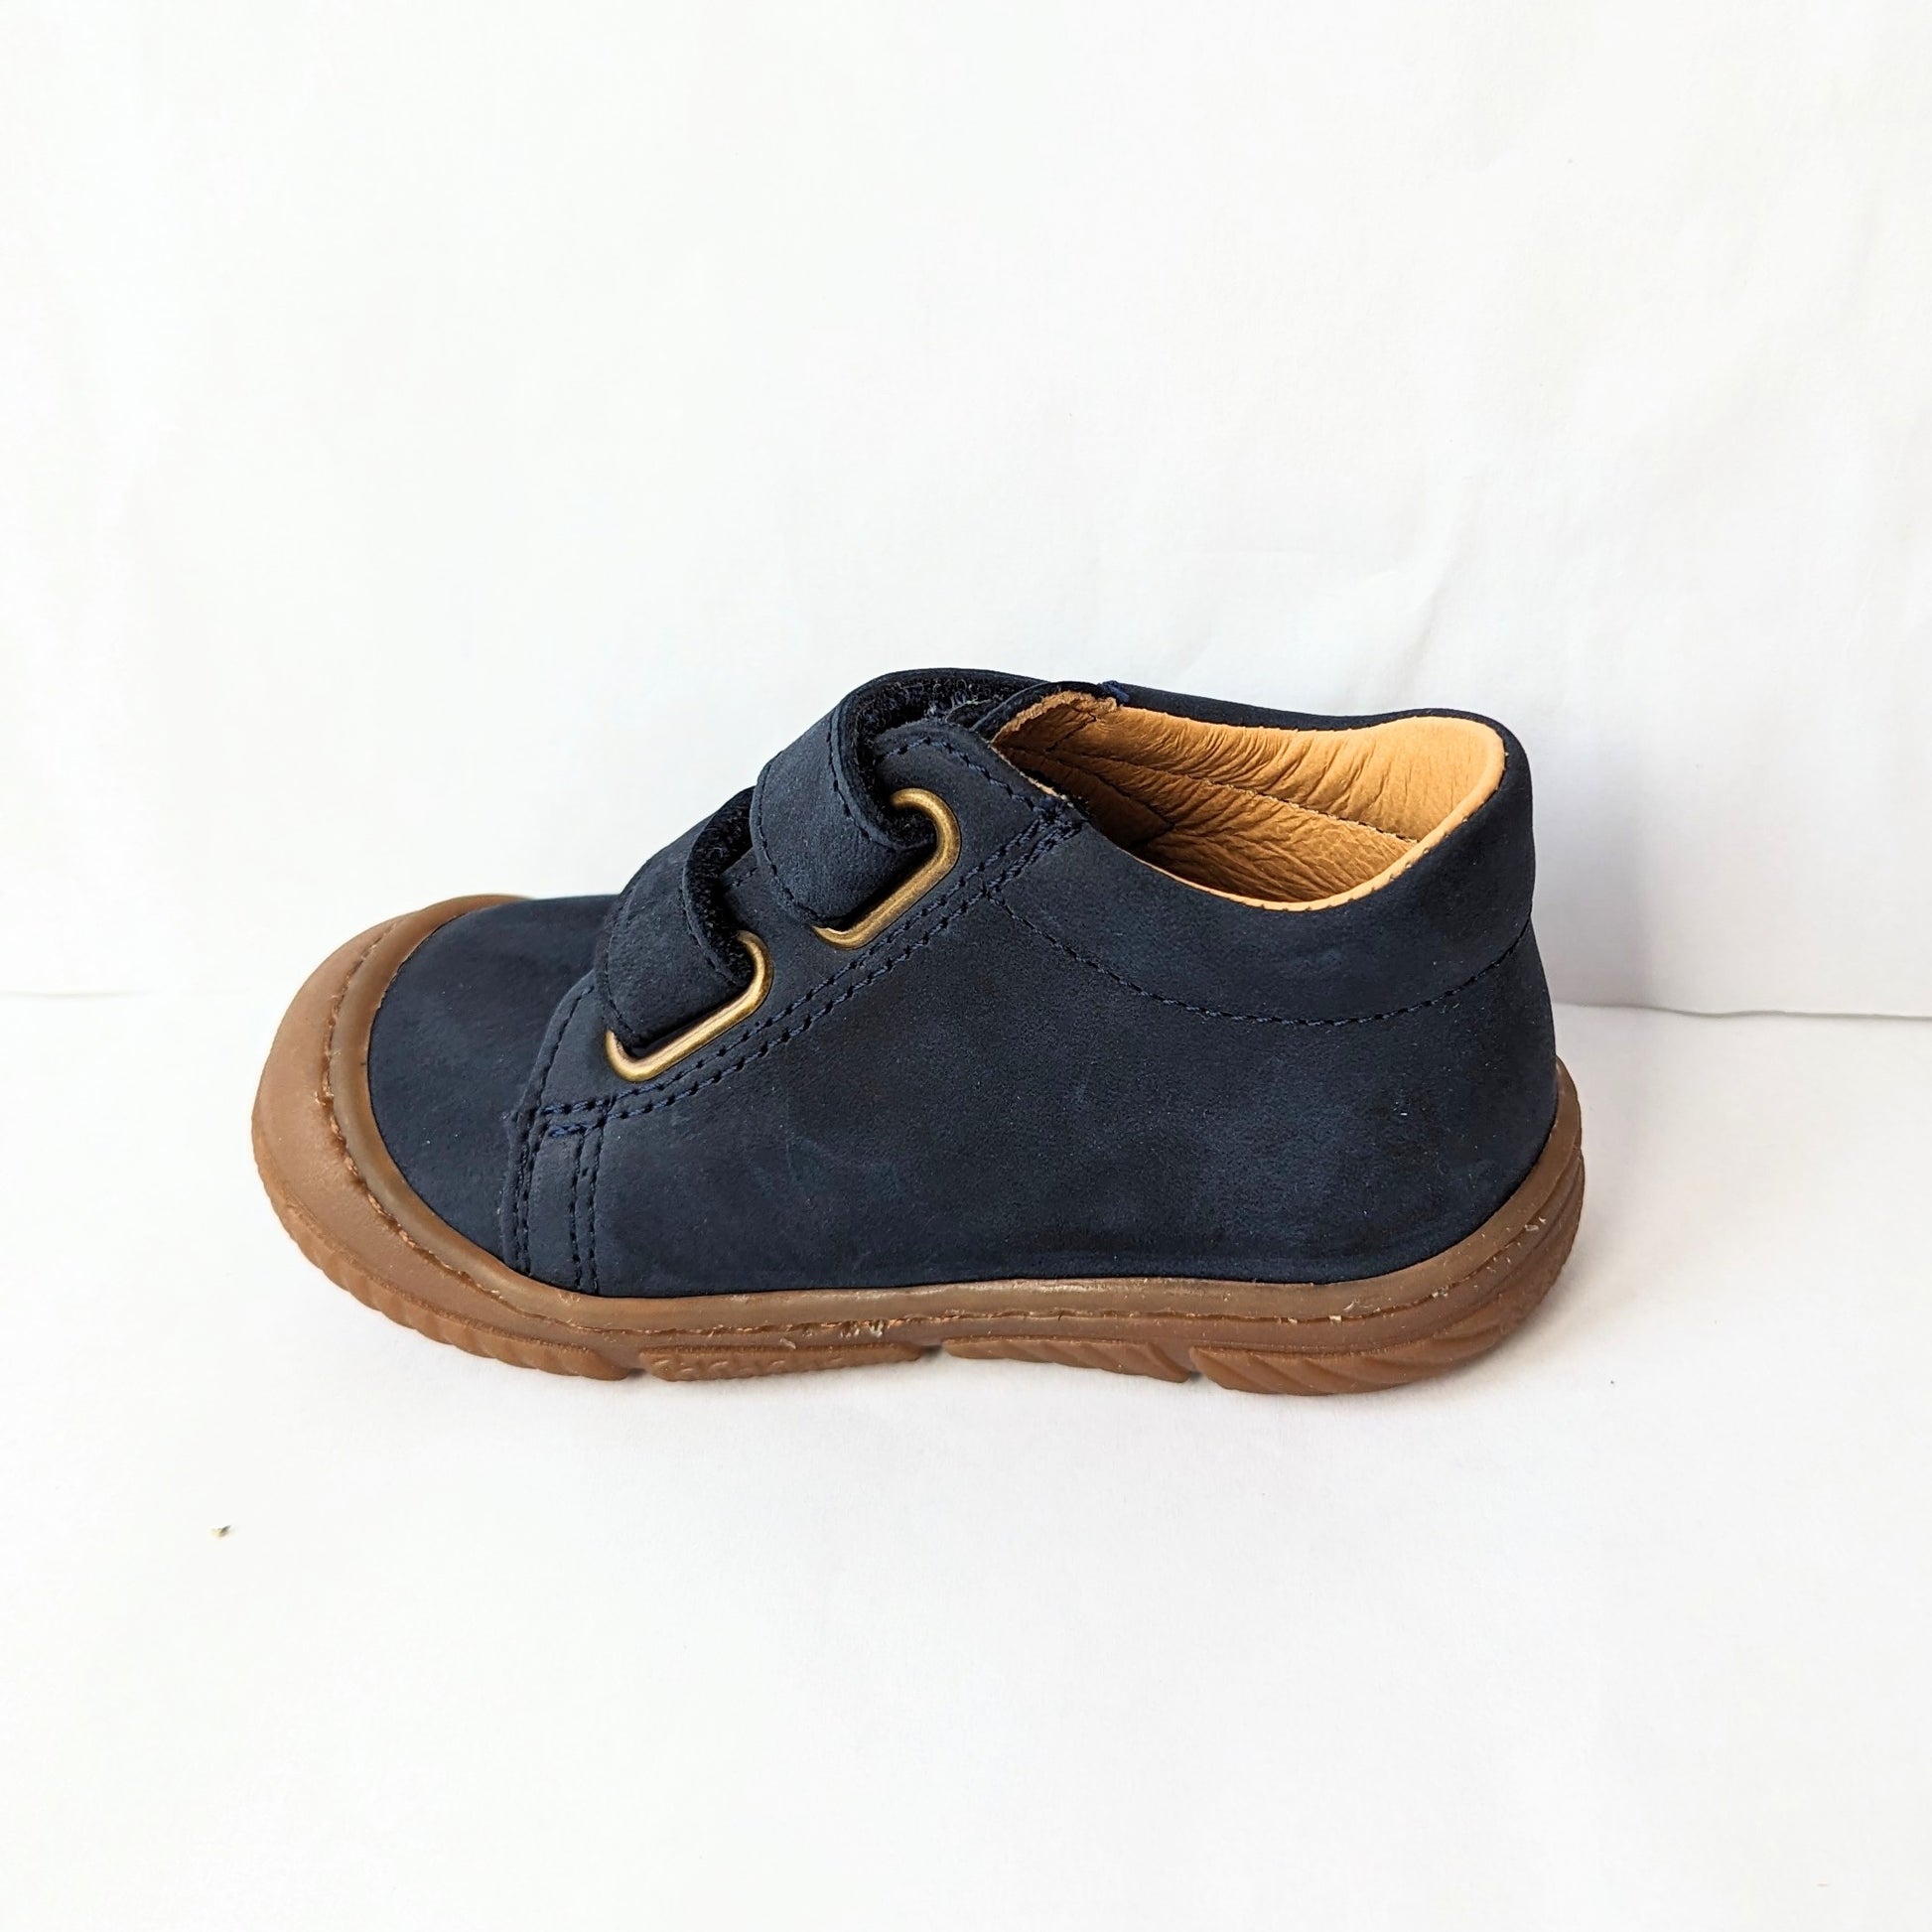 A boys ankle boot by Bopy, style Jameco, in navy nubuck with toe bumper and double velcro fastening. Left side view.